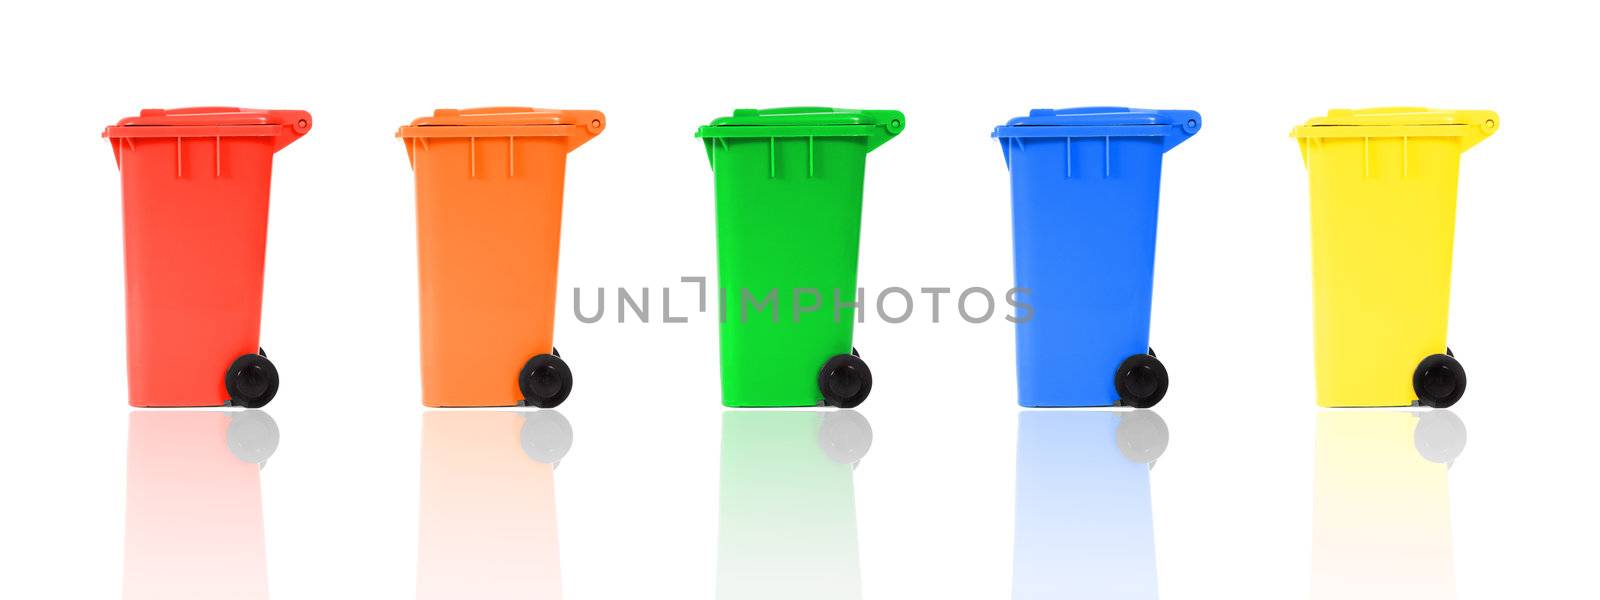 set of recycling bins with reflections